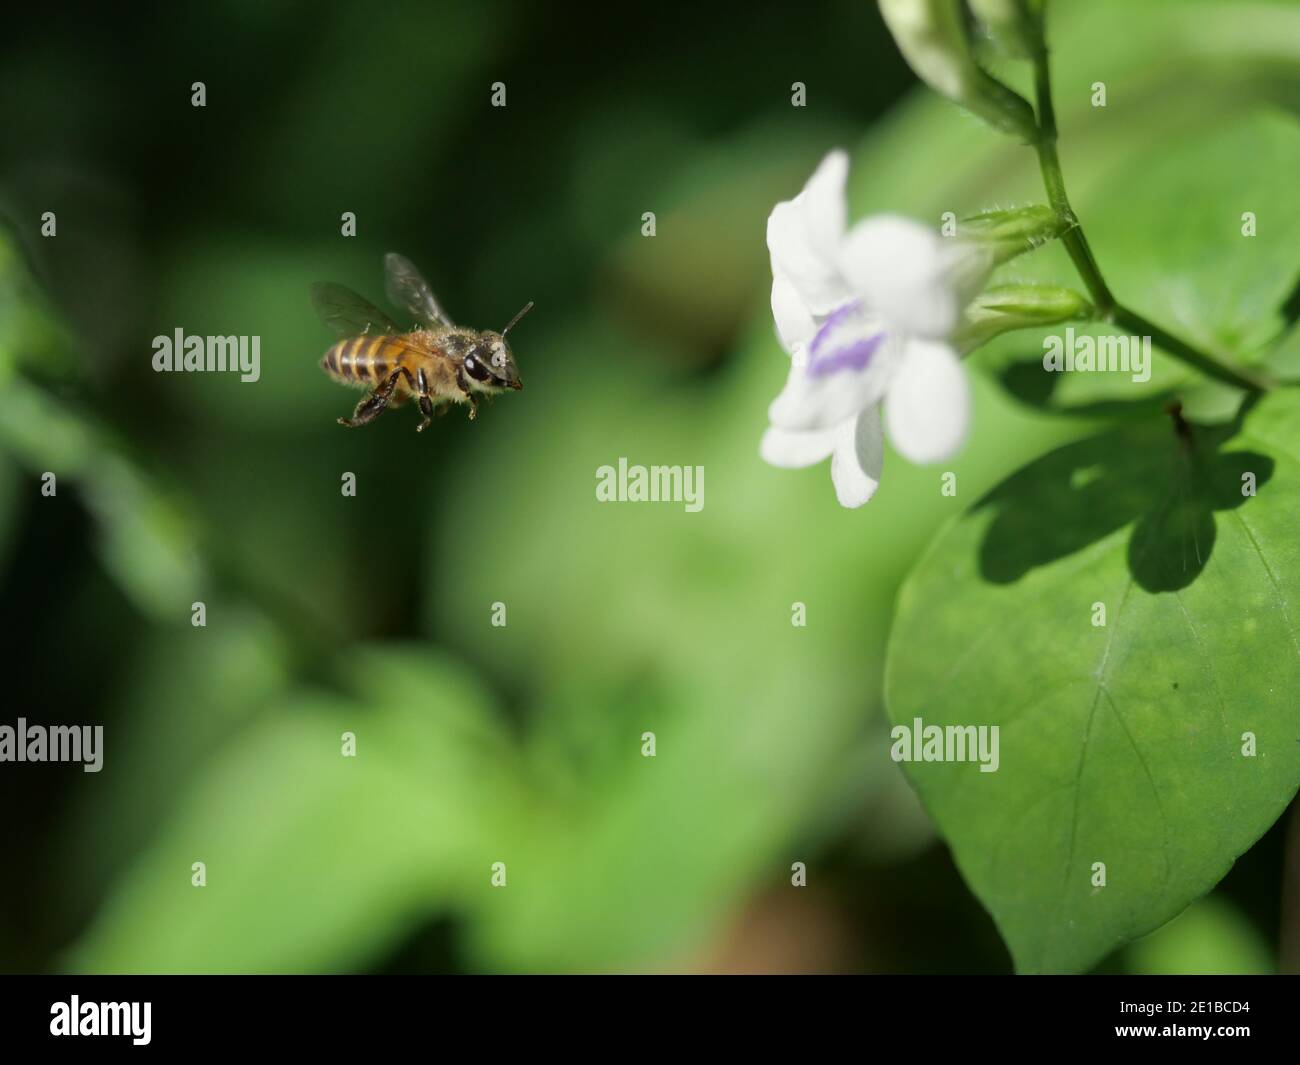 Honey Bee seeking nectar on white Chinese violet or coromandel or creeping foxglove ( Asystasia gangetica ) blossom in field with natural green Stock Photo